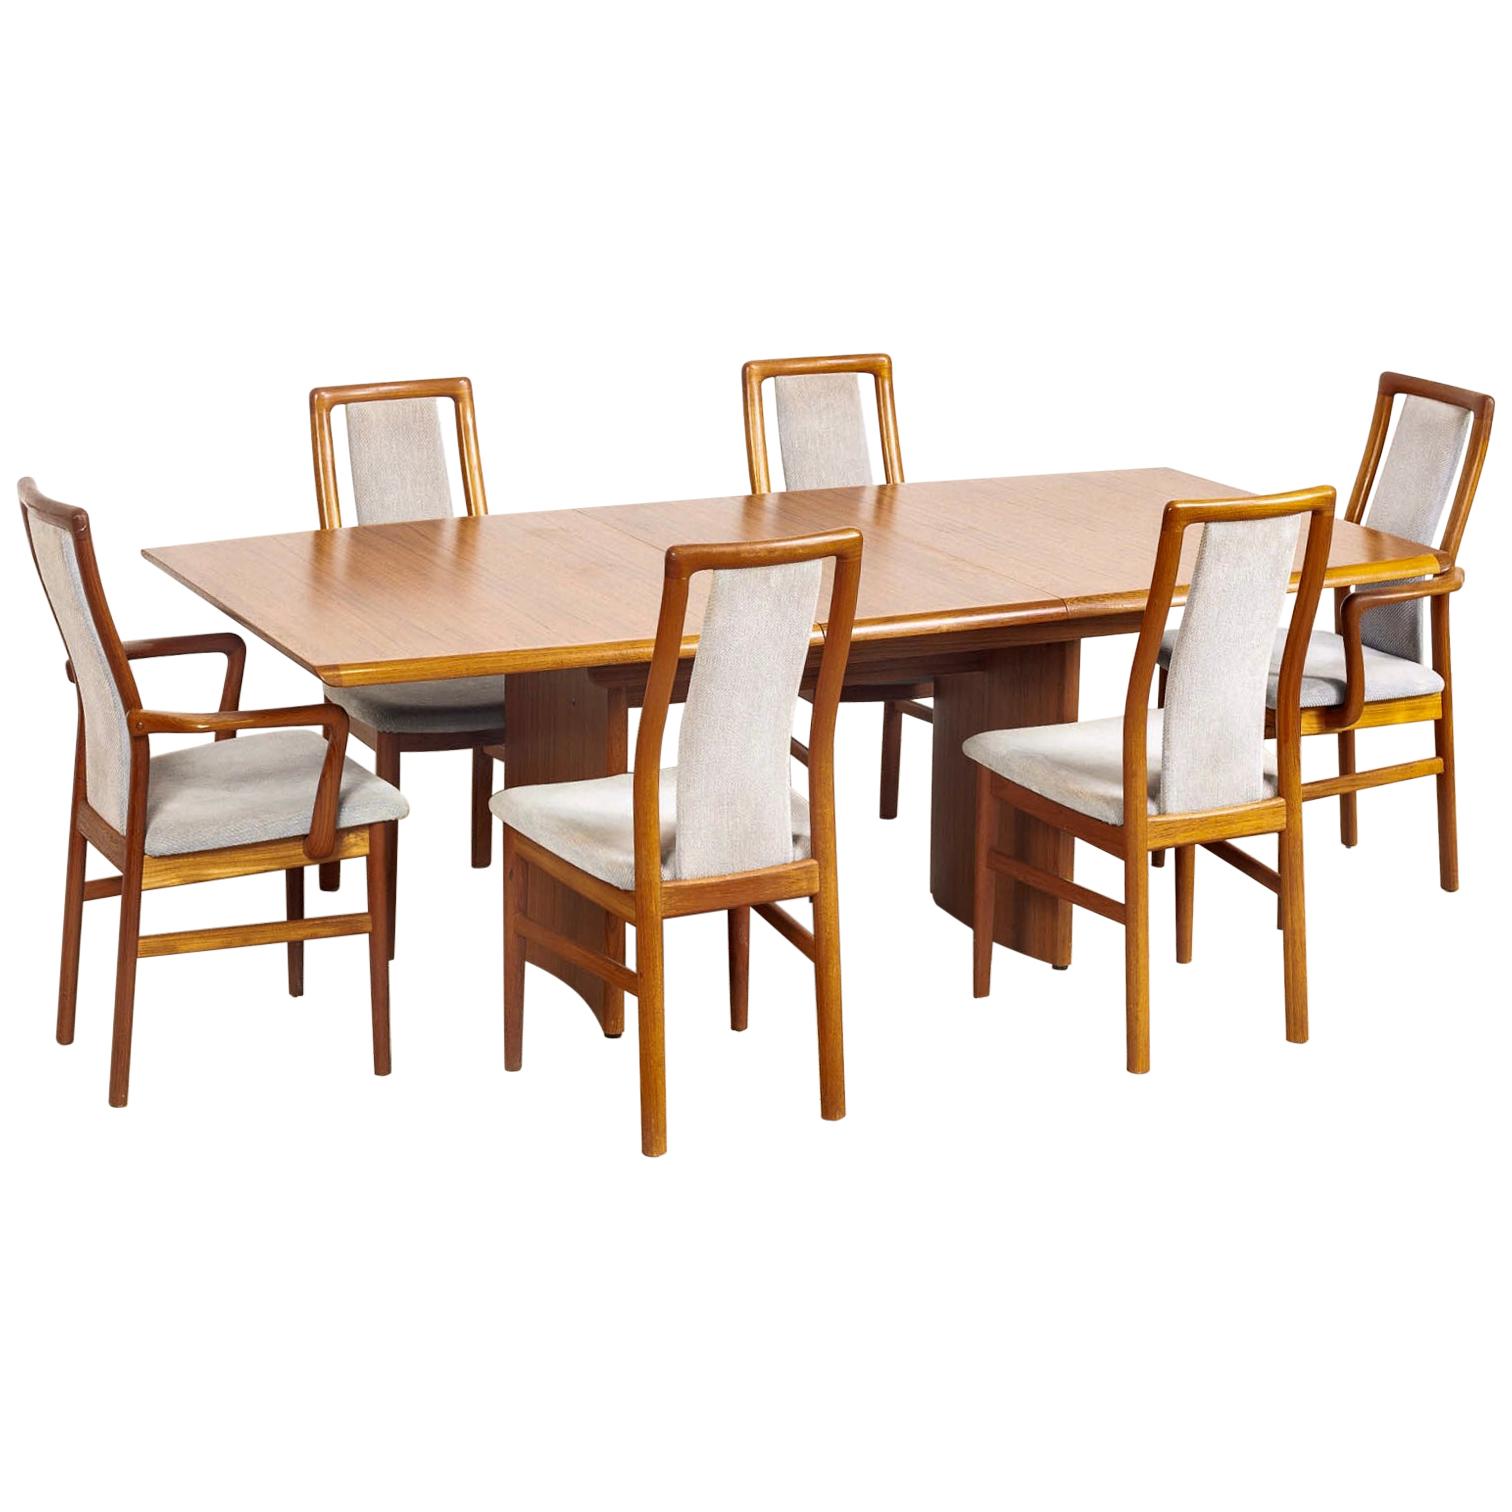 Mid-Century Danish Modern Teak Dining Set with Dining Table and 6 Dining Chairs For Sale